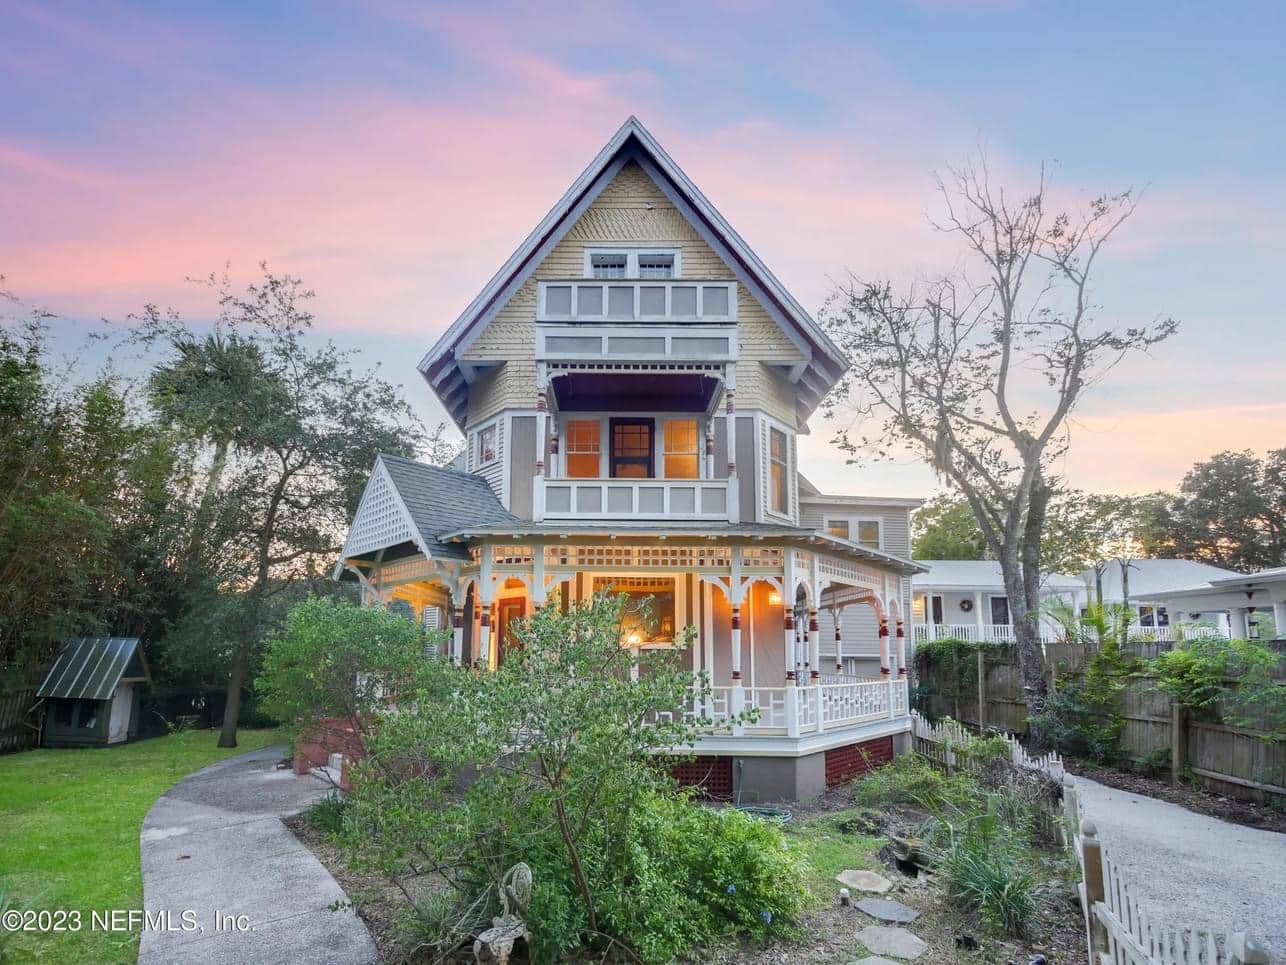 1890 Victorian For Sale In Saint Augustine Florida